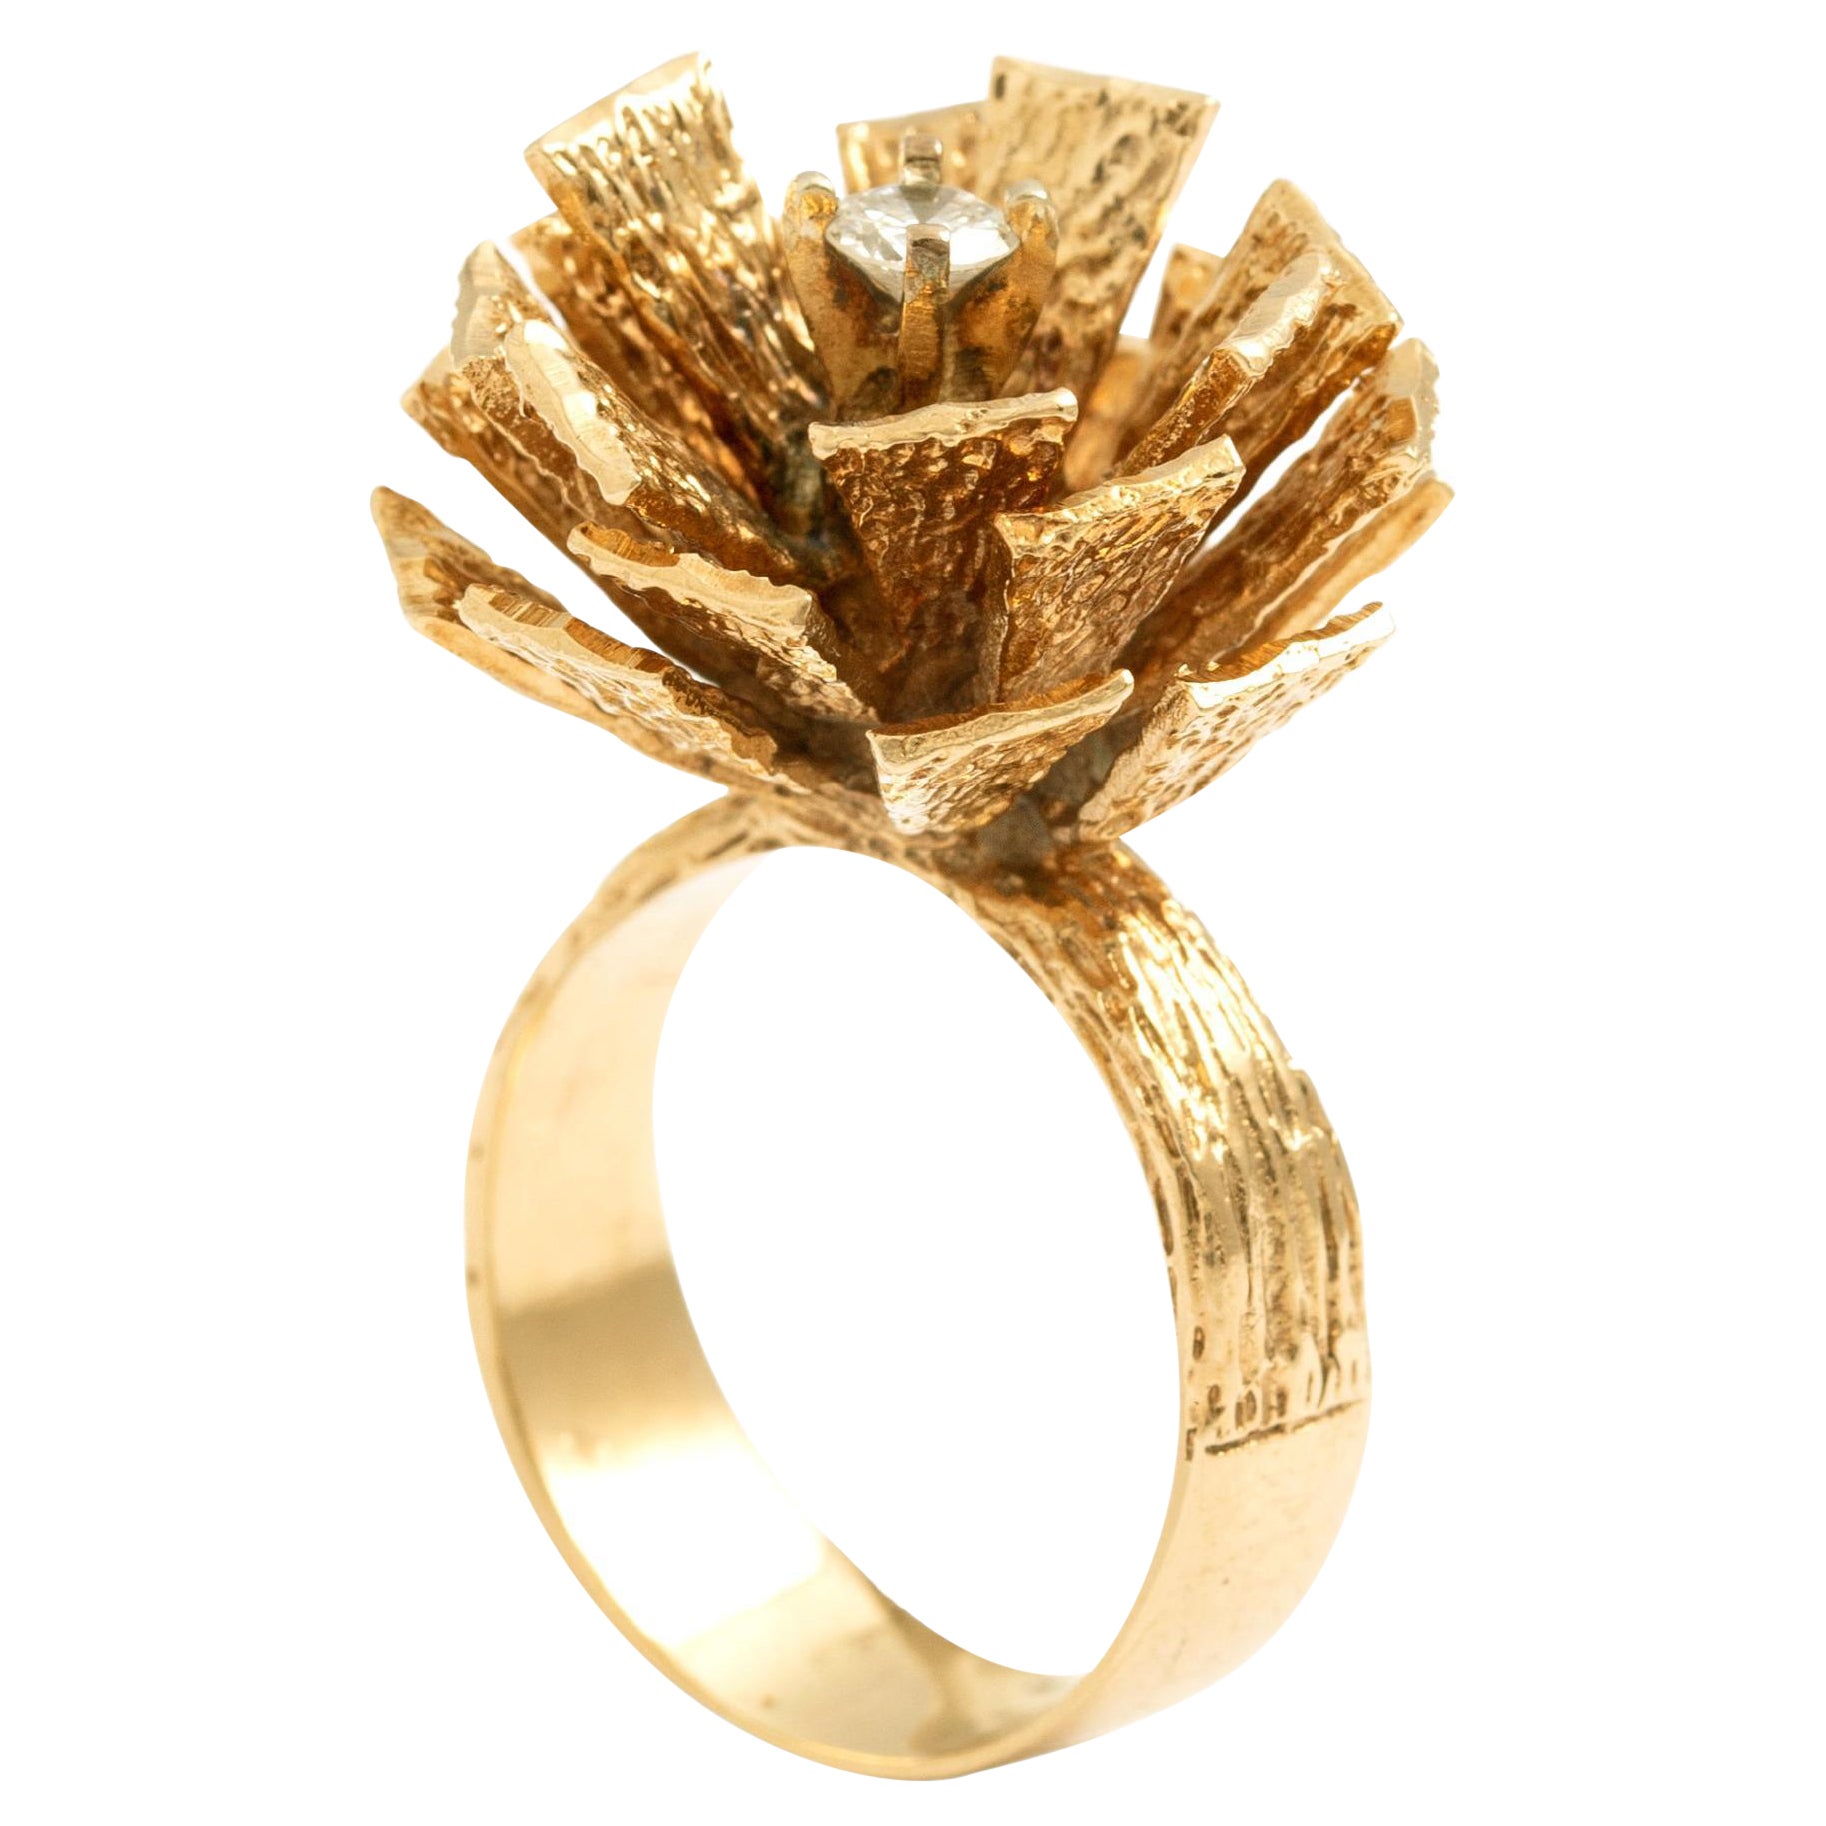 Gold Ring centered by a round cut diamond.
Dimensions: 
Stylized Flower design: 2.20 x 2.20 centimeters.
Total weight: 14.49 grams.